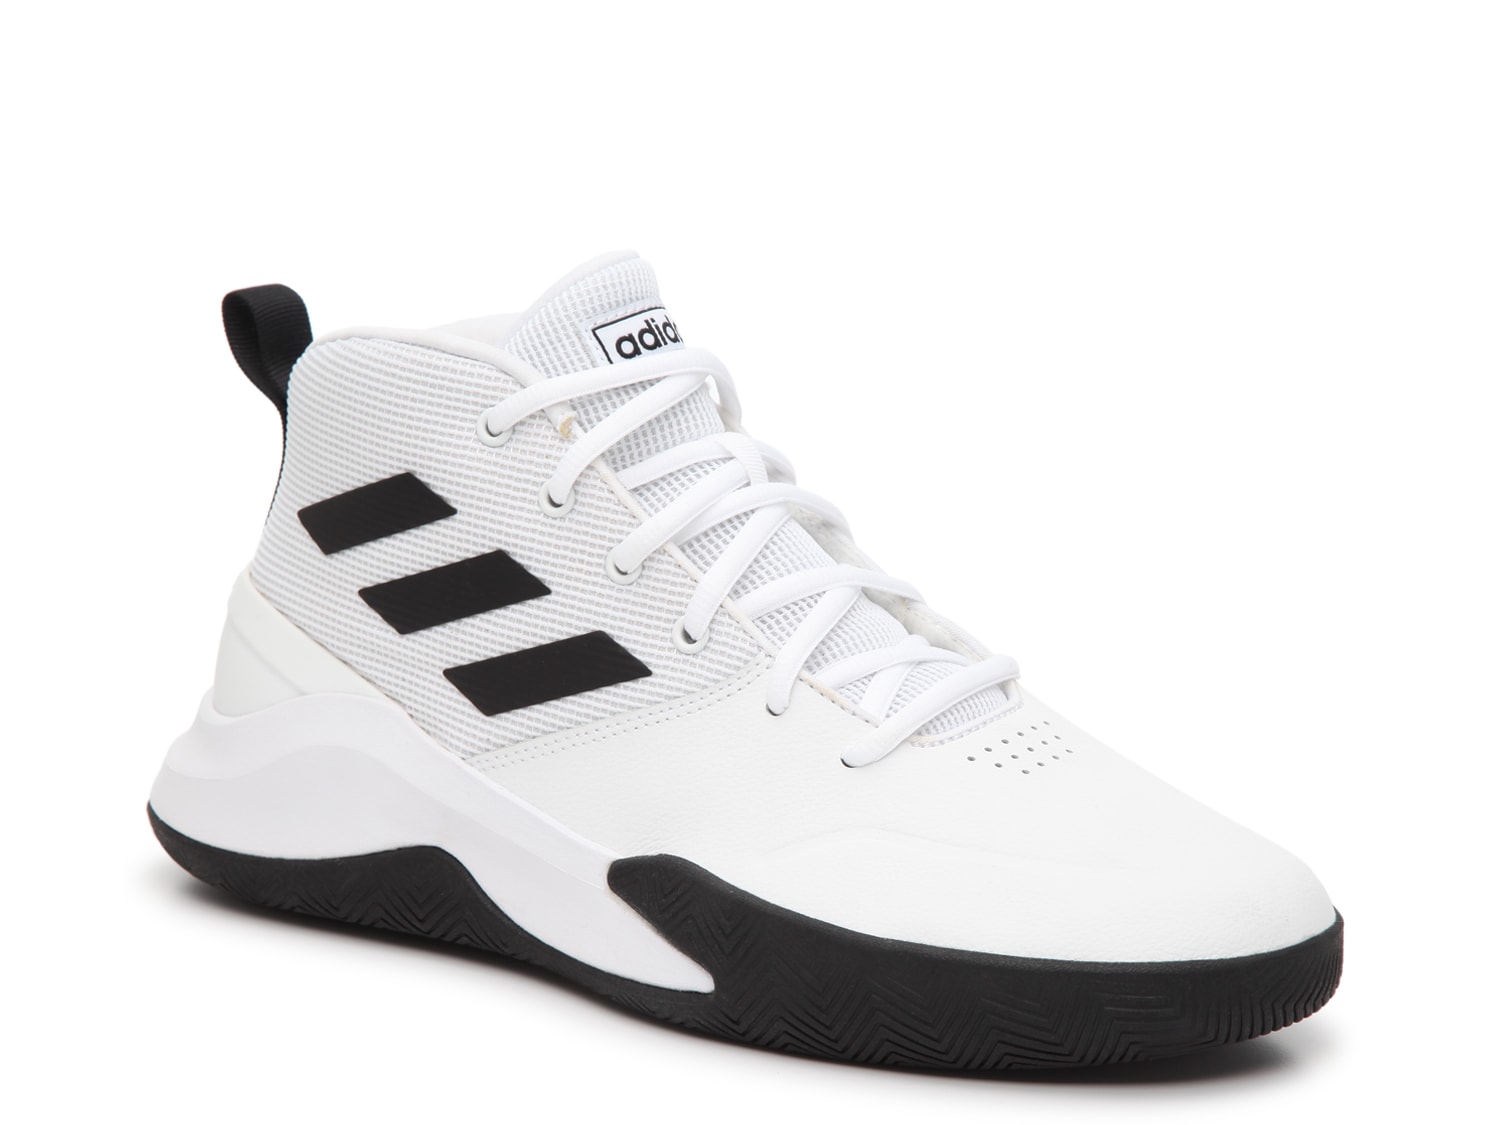 adidas ownthegame shoes men's